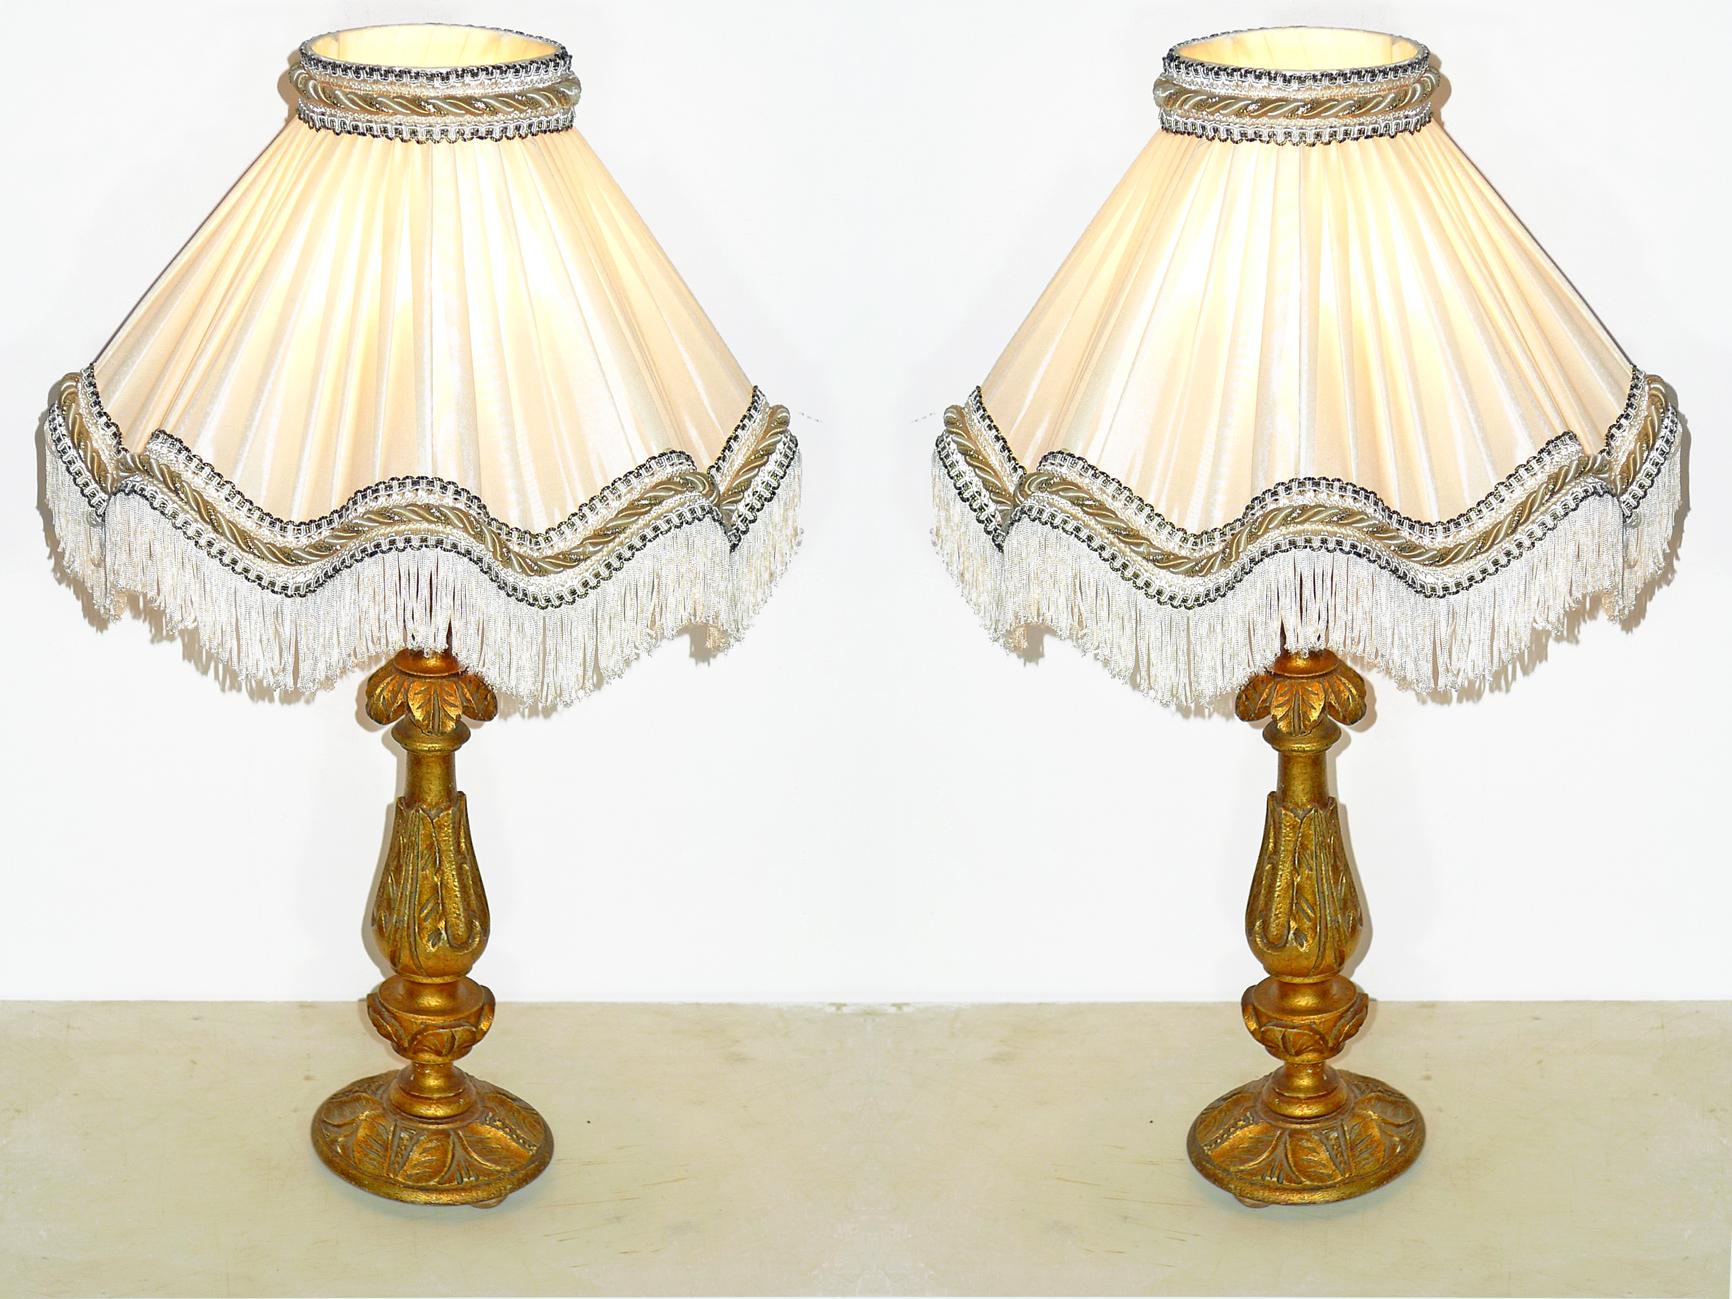 Pair of Italian Baroque Carved Giltwood Candlesticks Torchères Ivory Table Lamps (Barock)